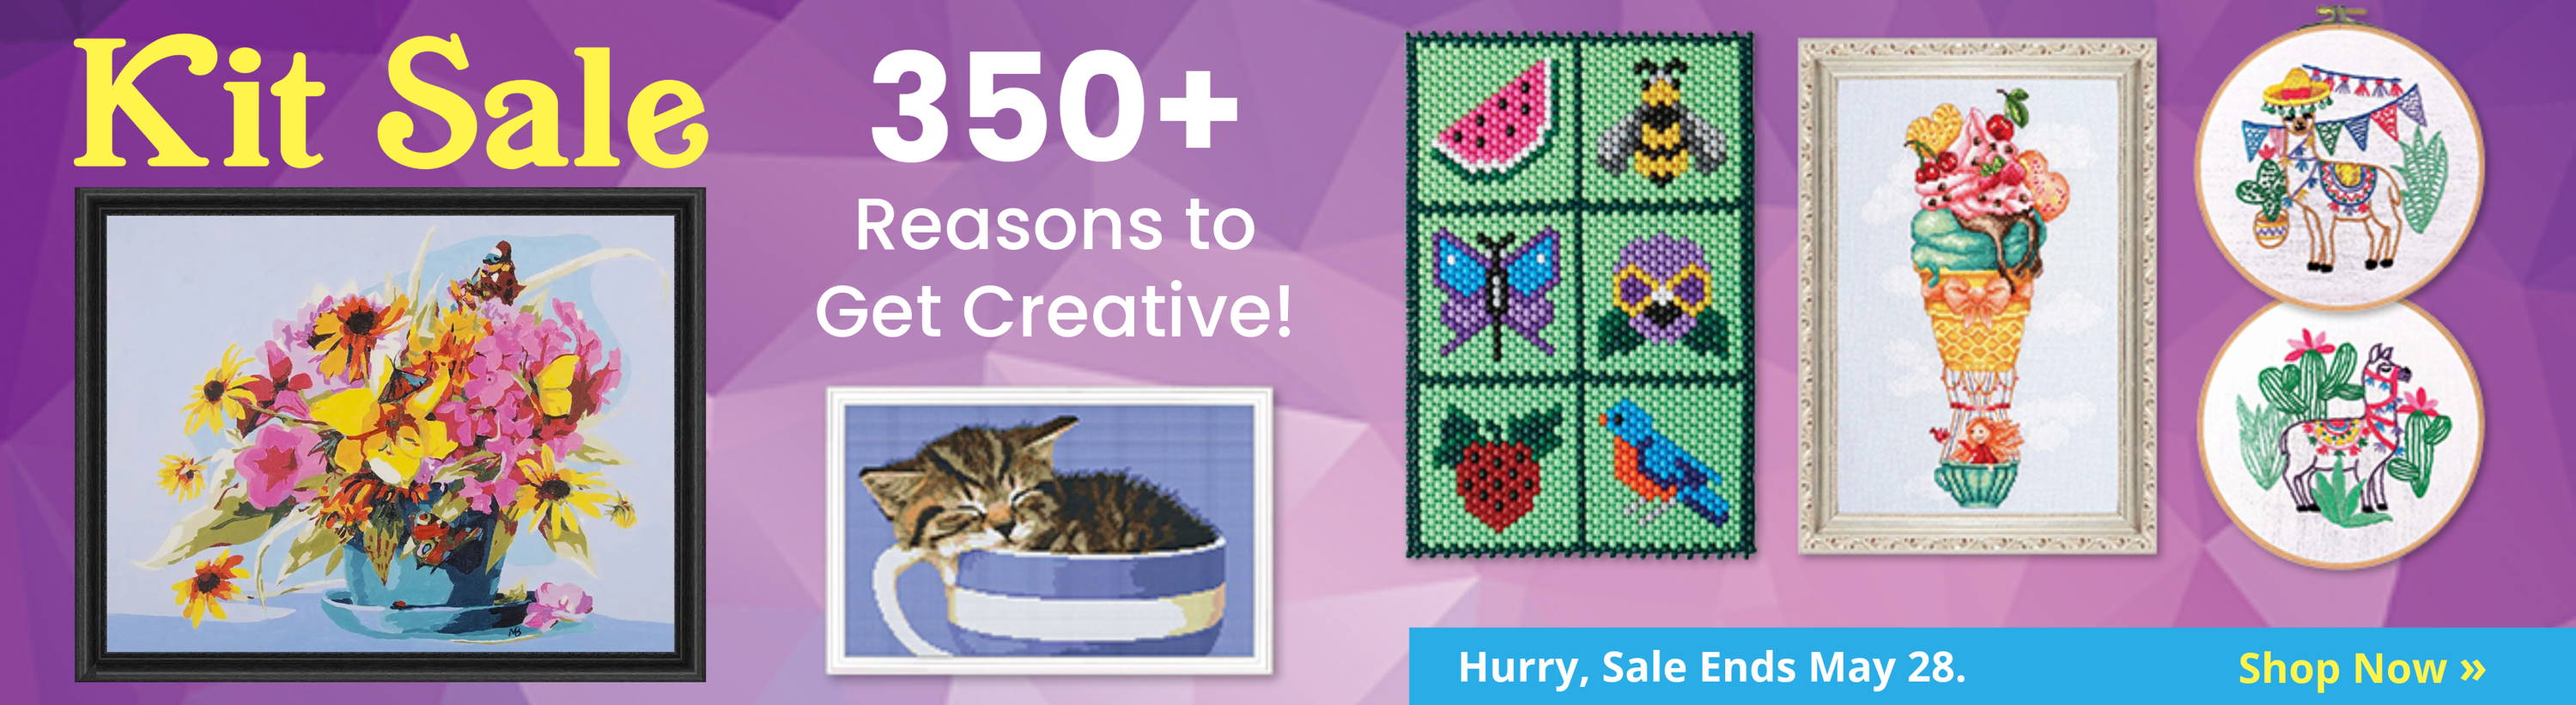 Kit Sale — 350+ Reasons to get creative! Until May 28. Image: Featured Kits.